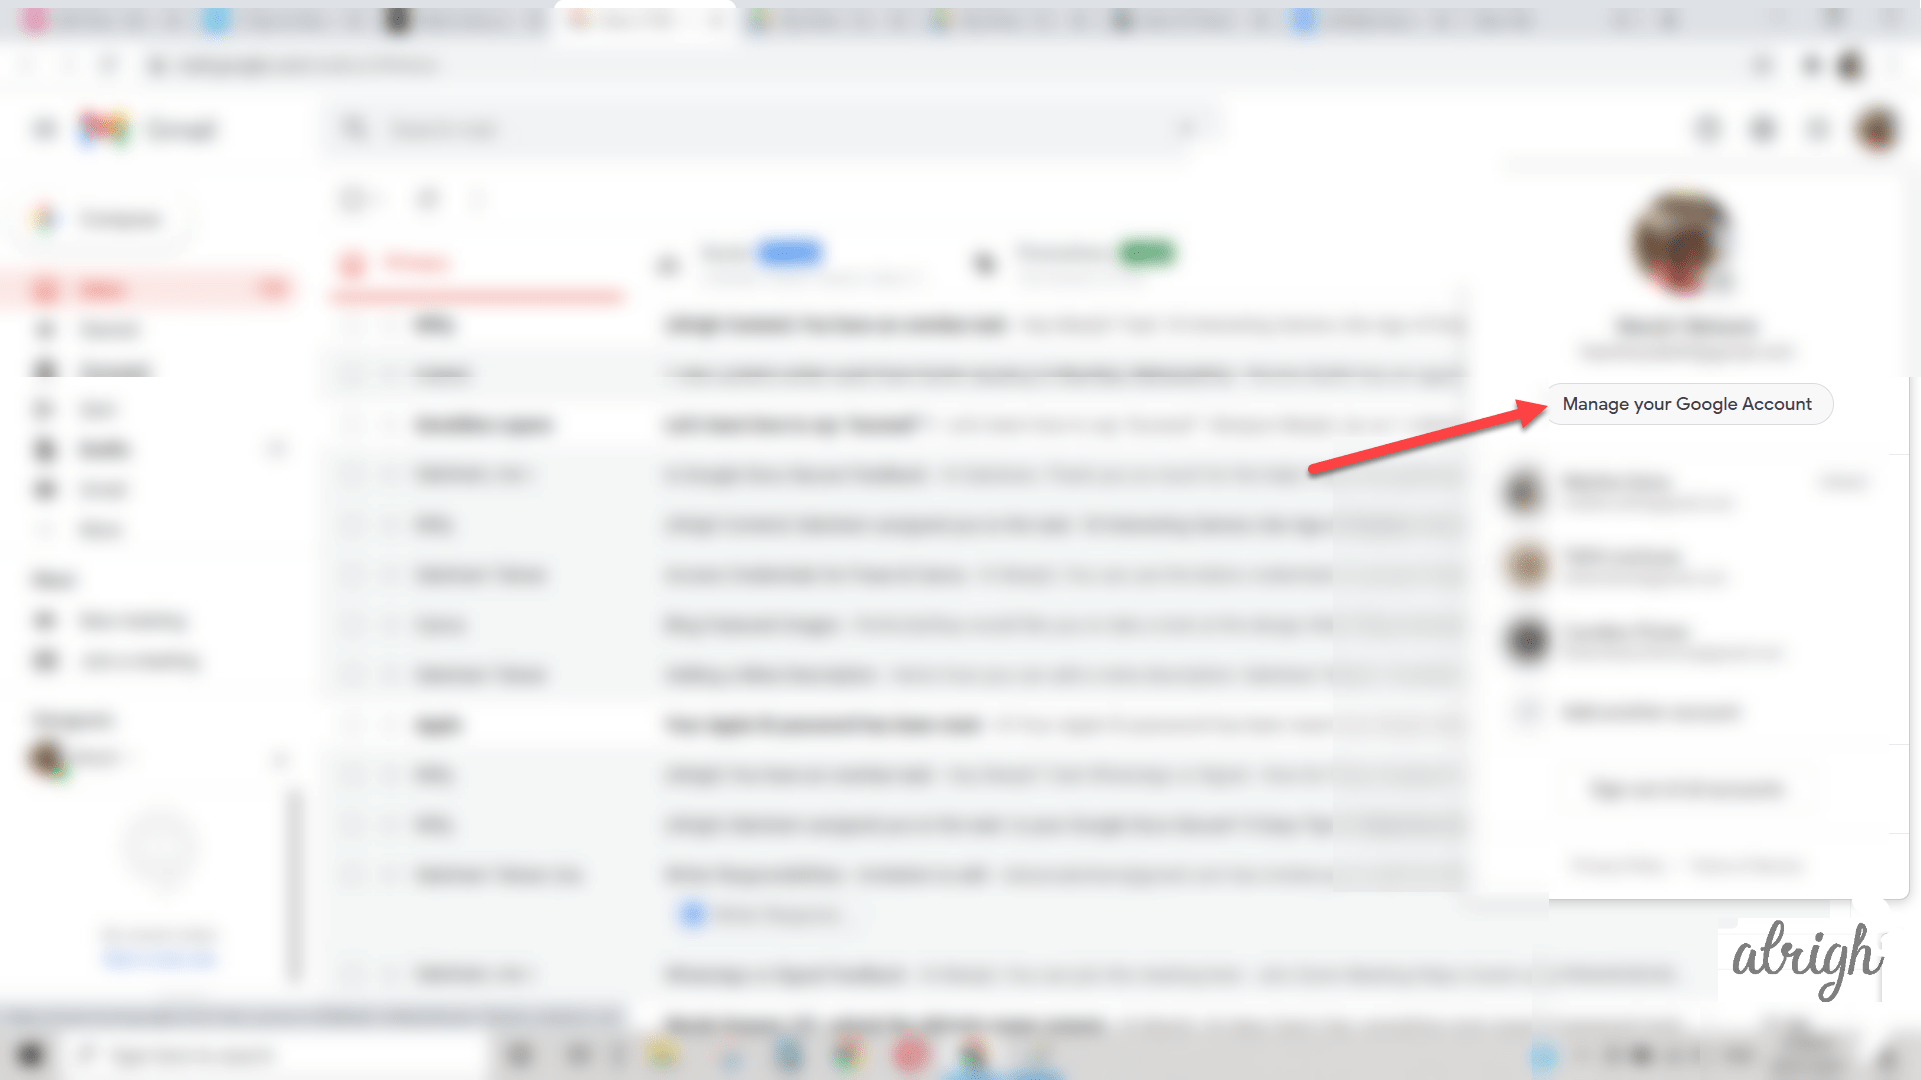 On gmail click on manage your google account option